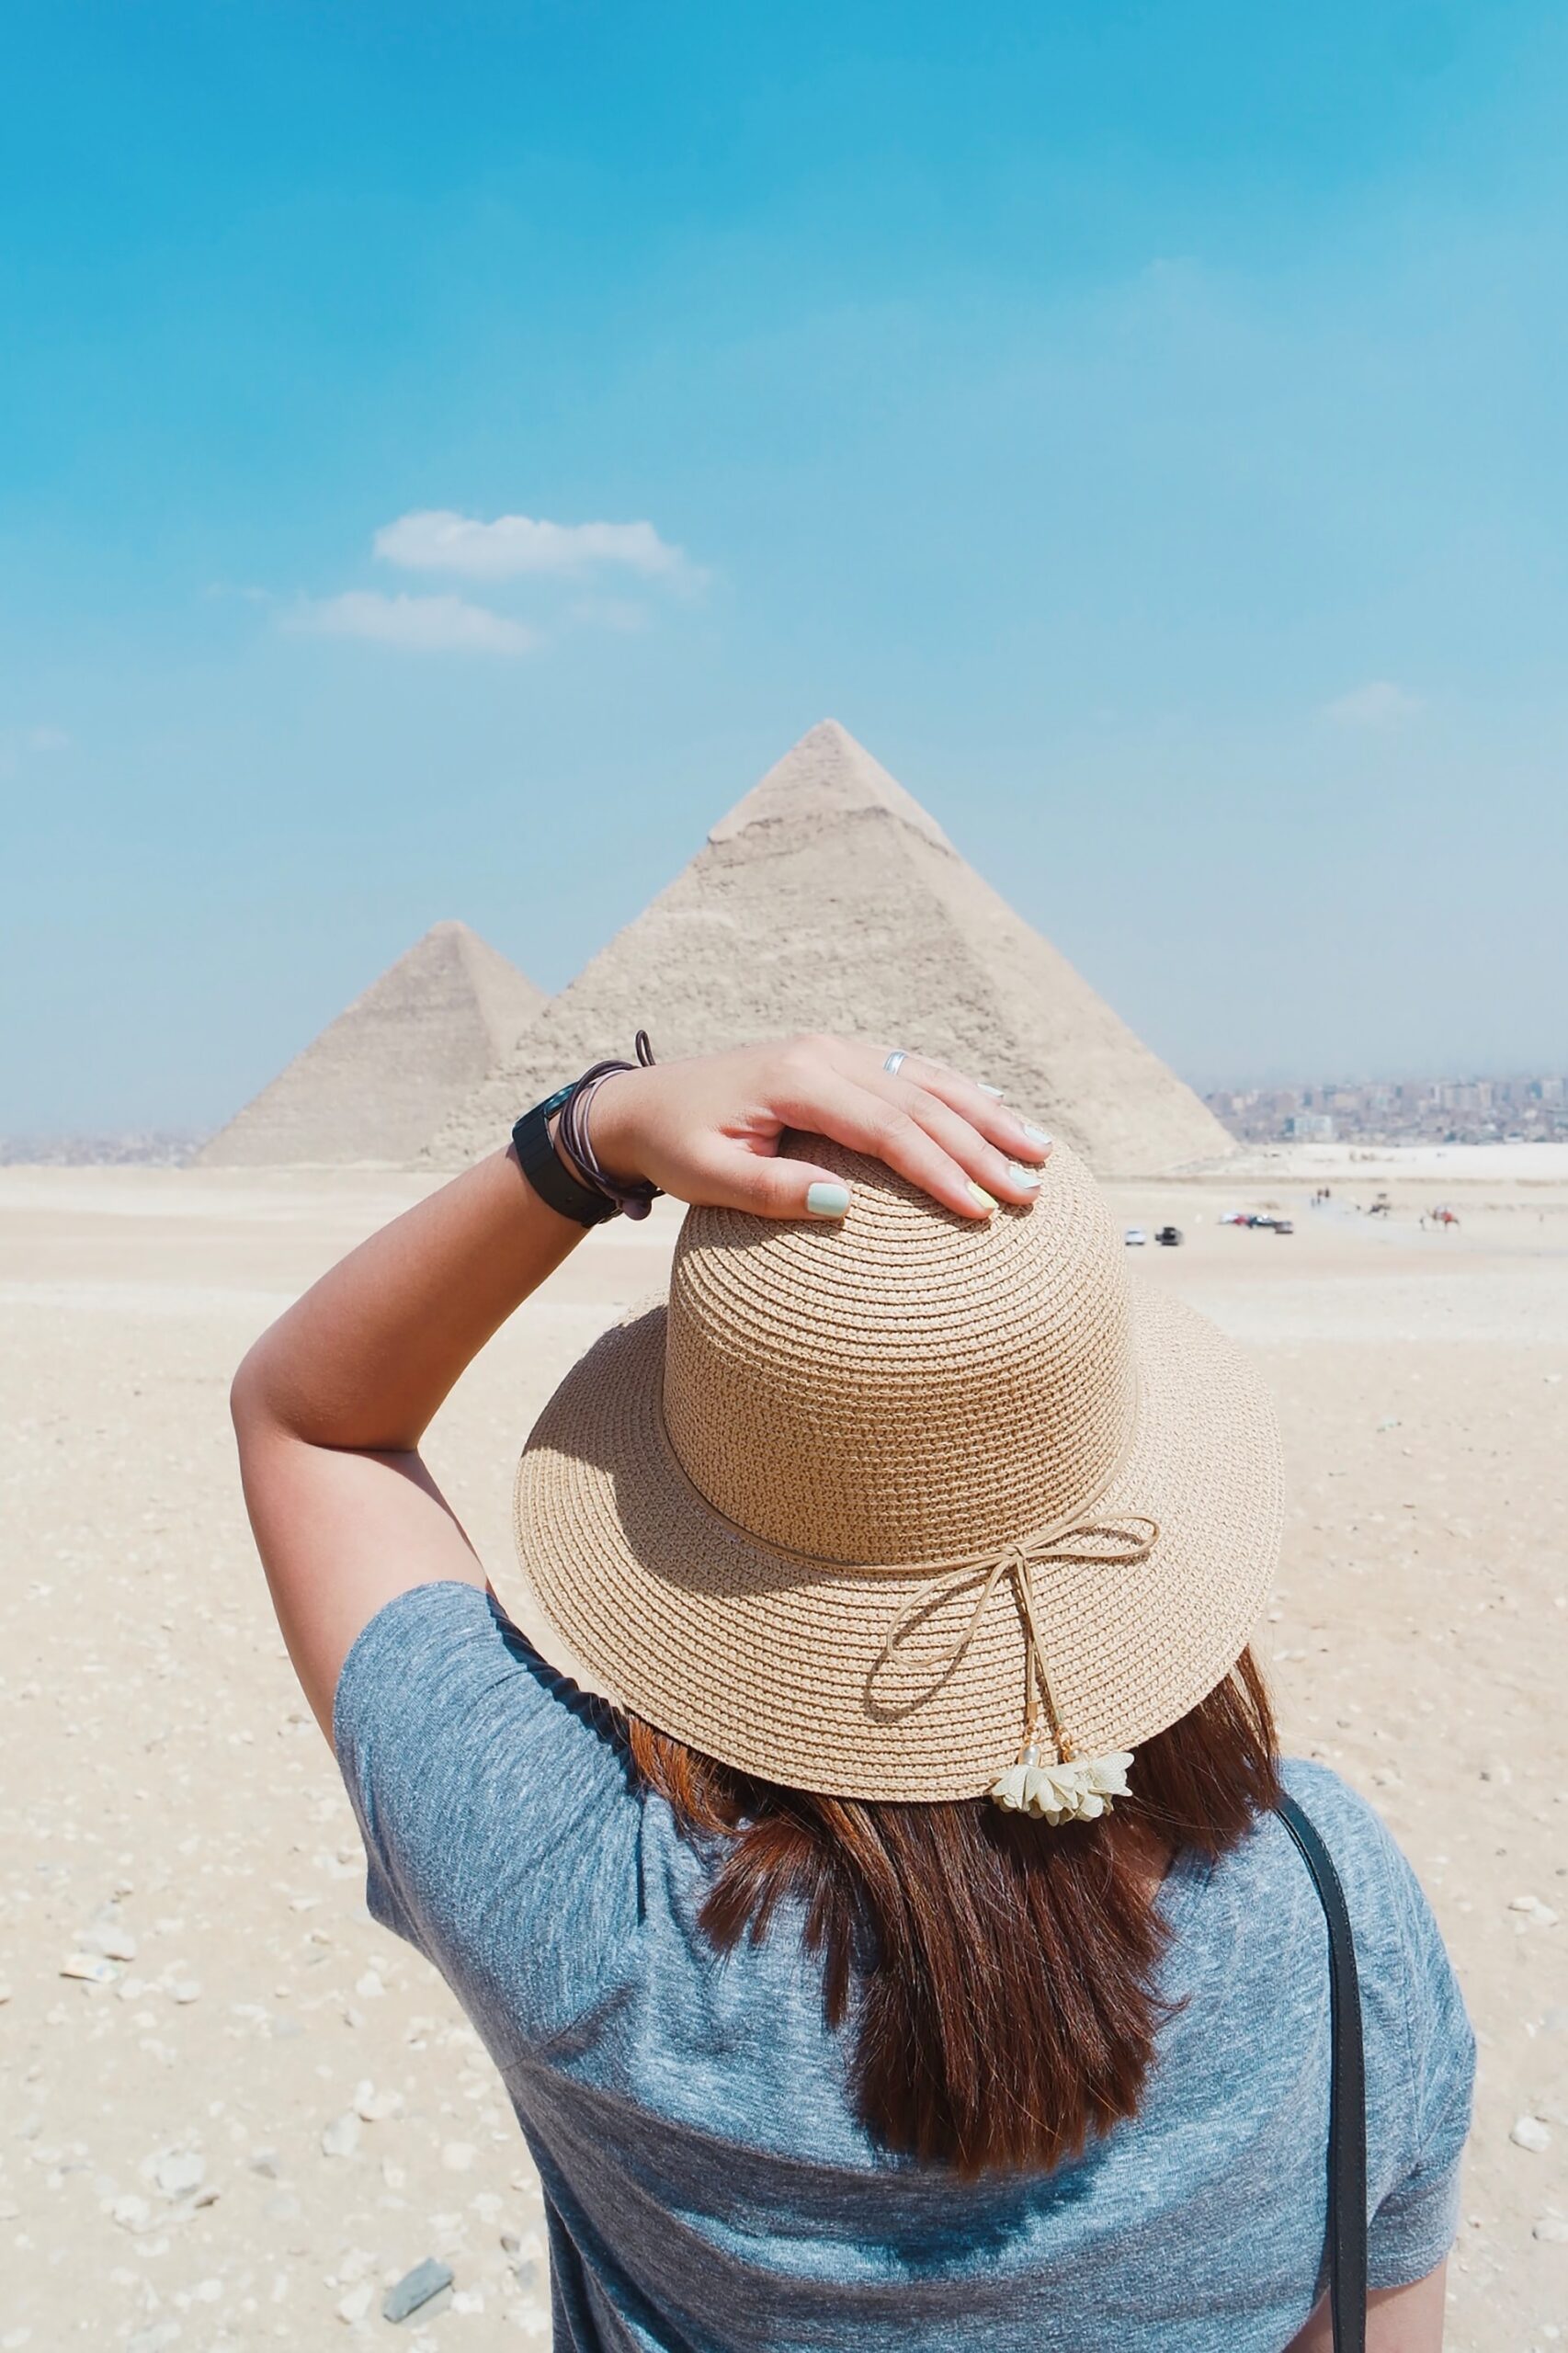 Visiting the Great Pyramids of Giza is a must for any Egypt vacation (photo: Julian Obejas)